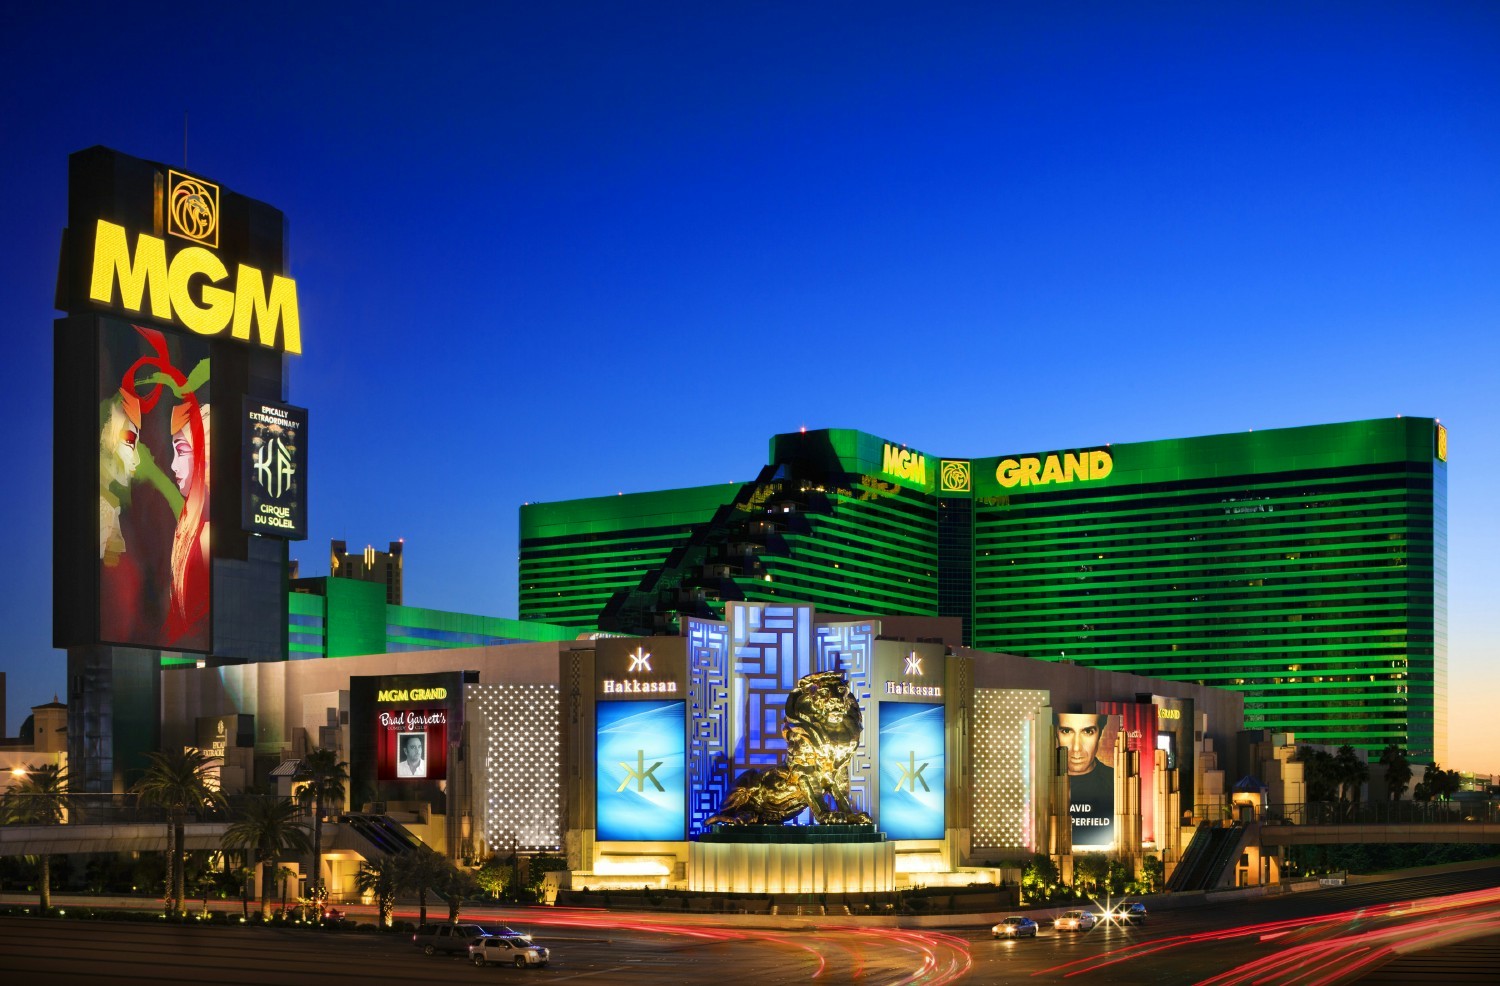 The VICI portfolio also incudes the very well-known MGM Grand in Las Vegas, Nevada.